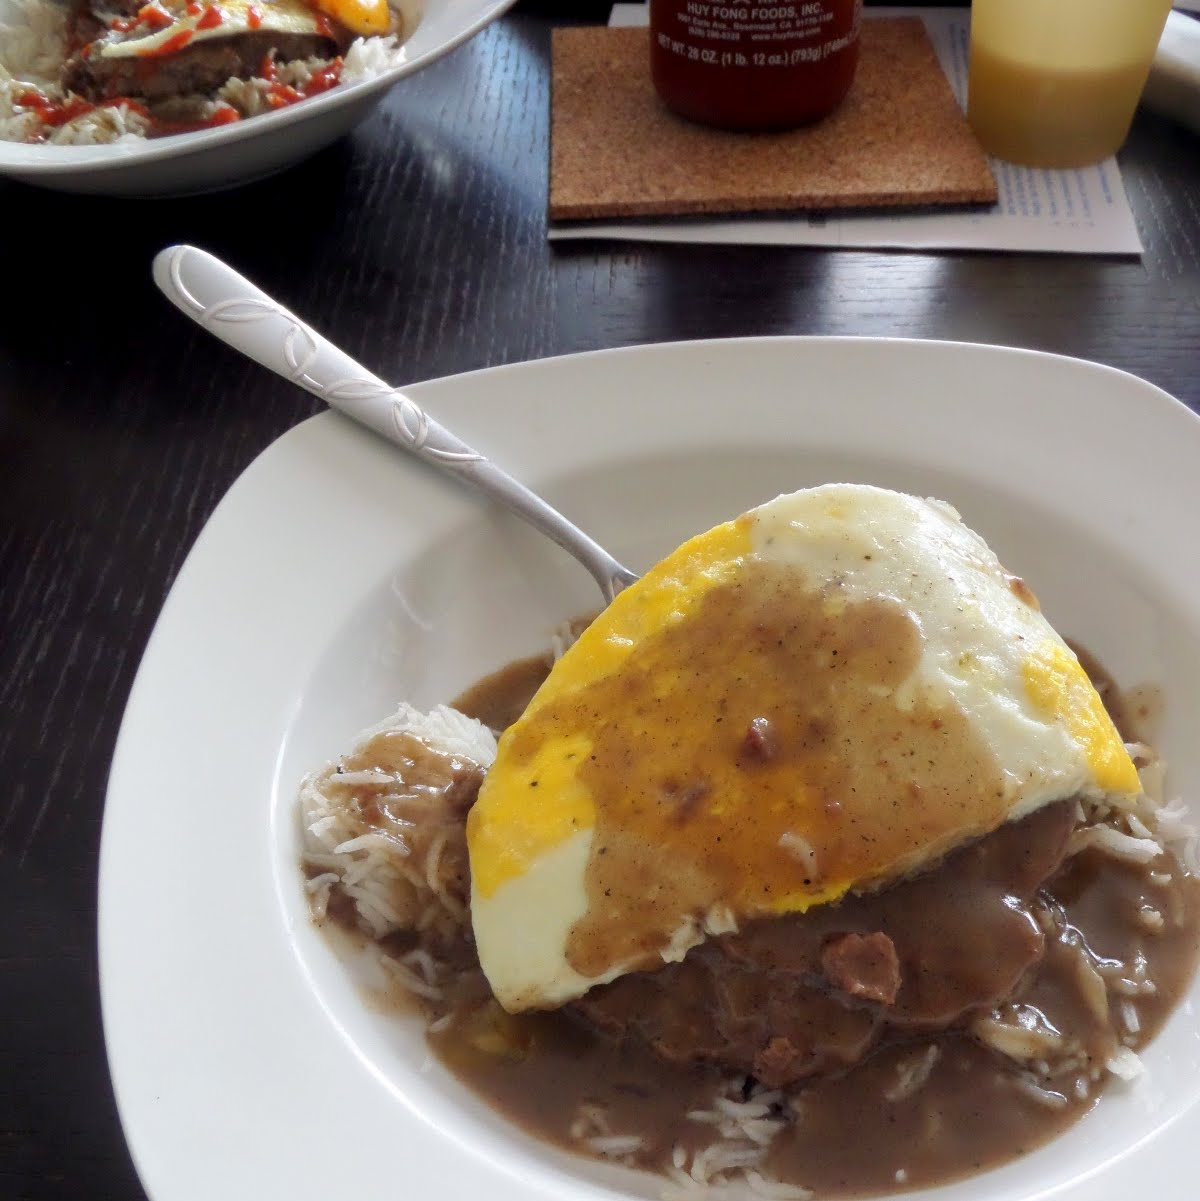 Loco Moco:  White rice smothered in brown gravy and a beef patty topped with a fried egg.  The Hawaiian breakfast of champions.